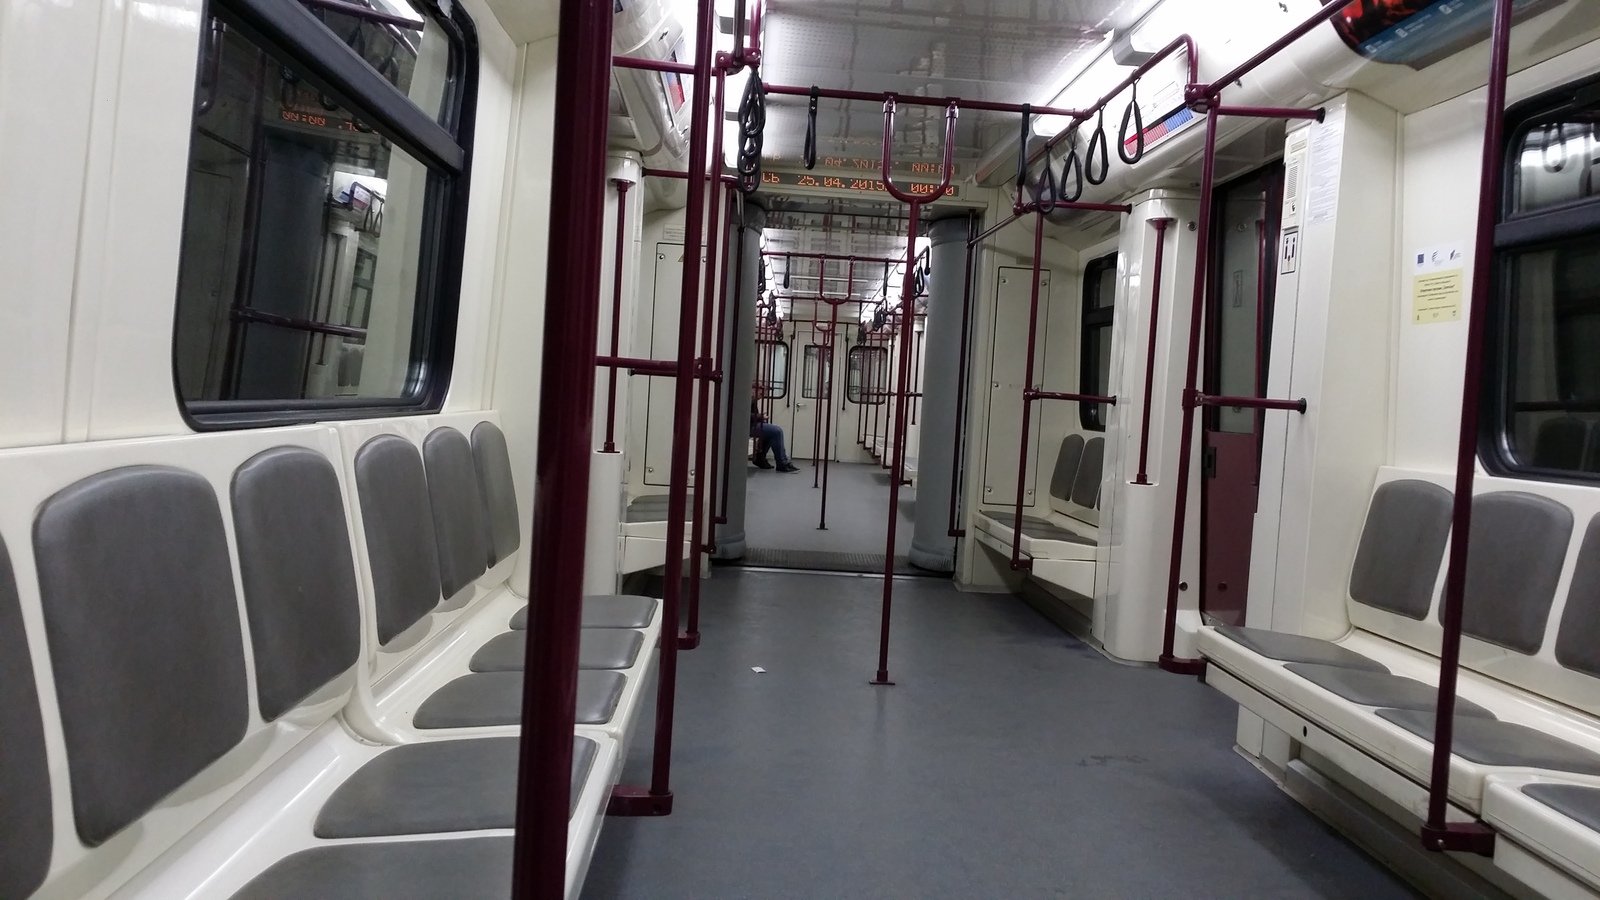 inside the empty subway train car where passengers are seen